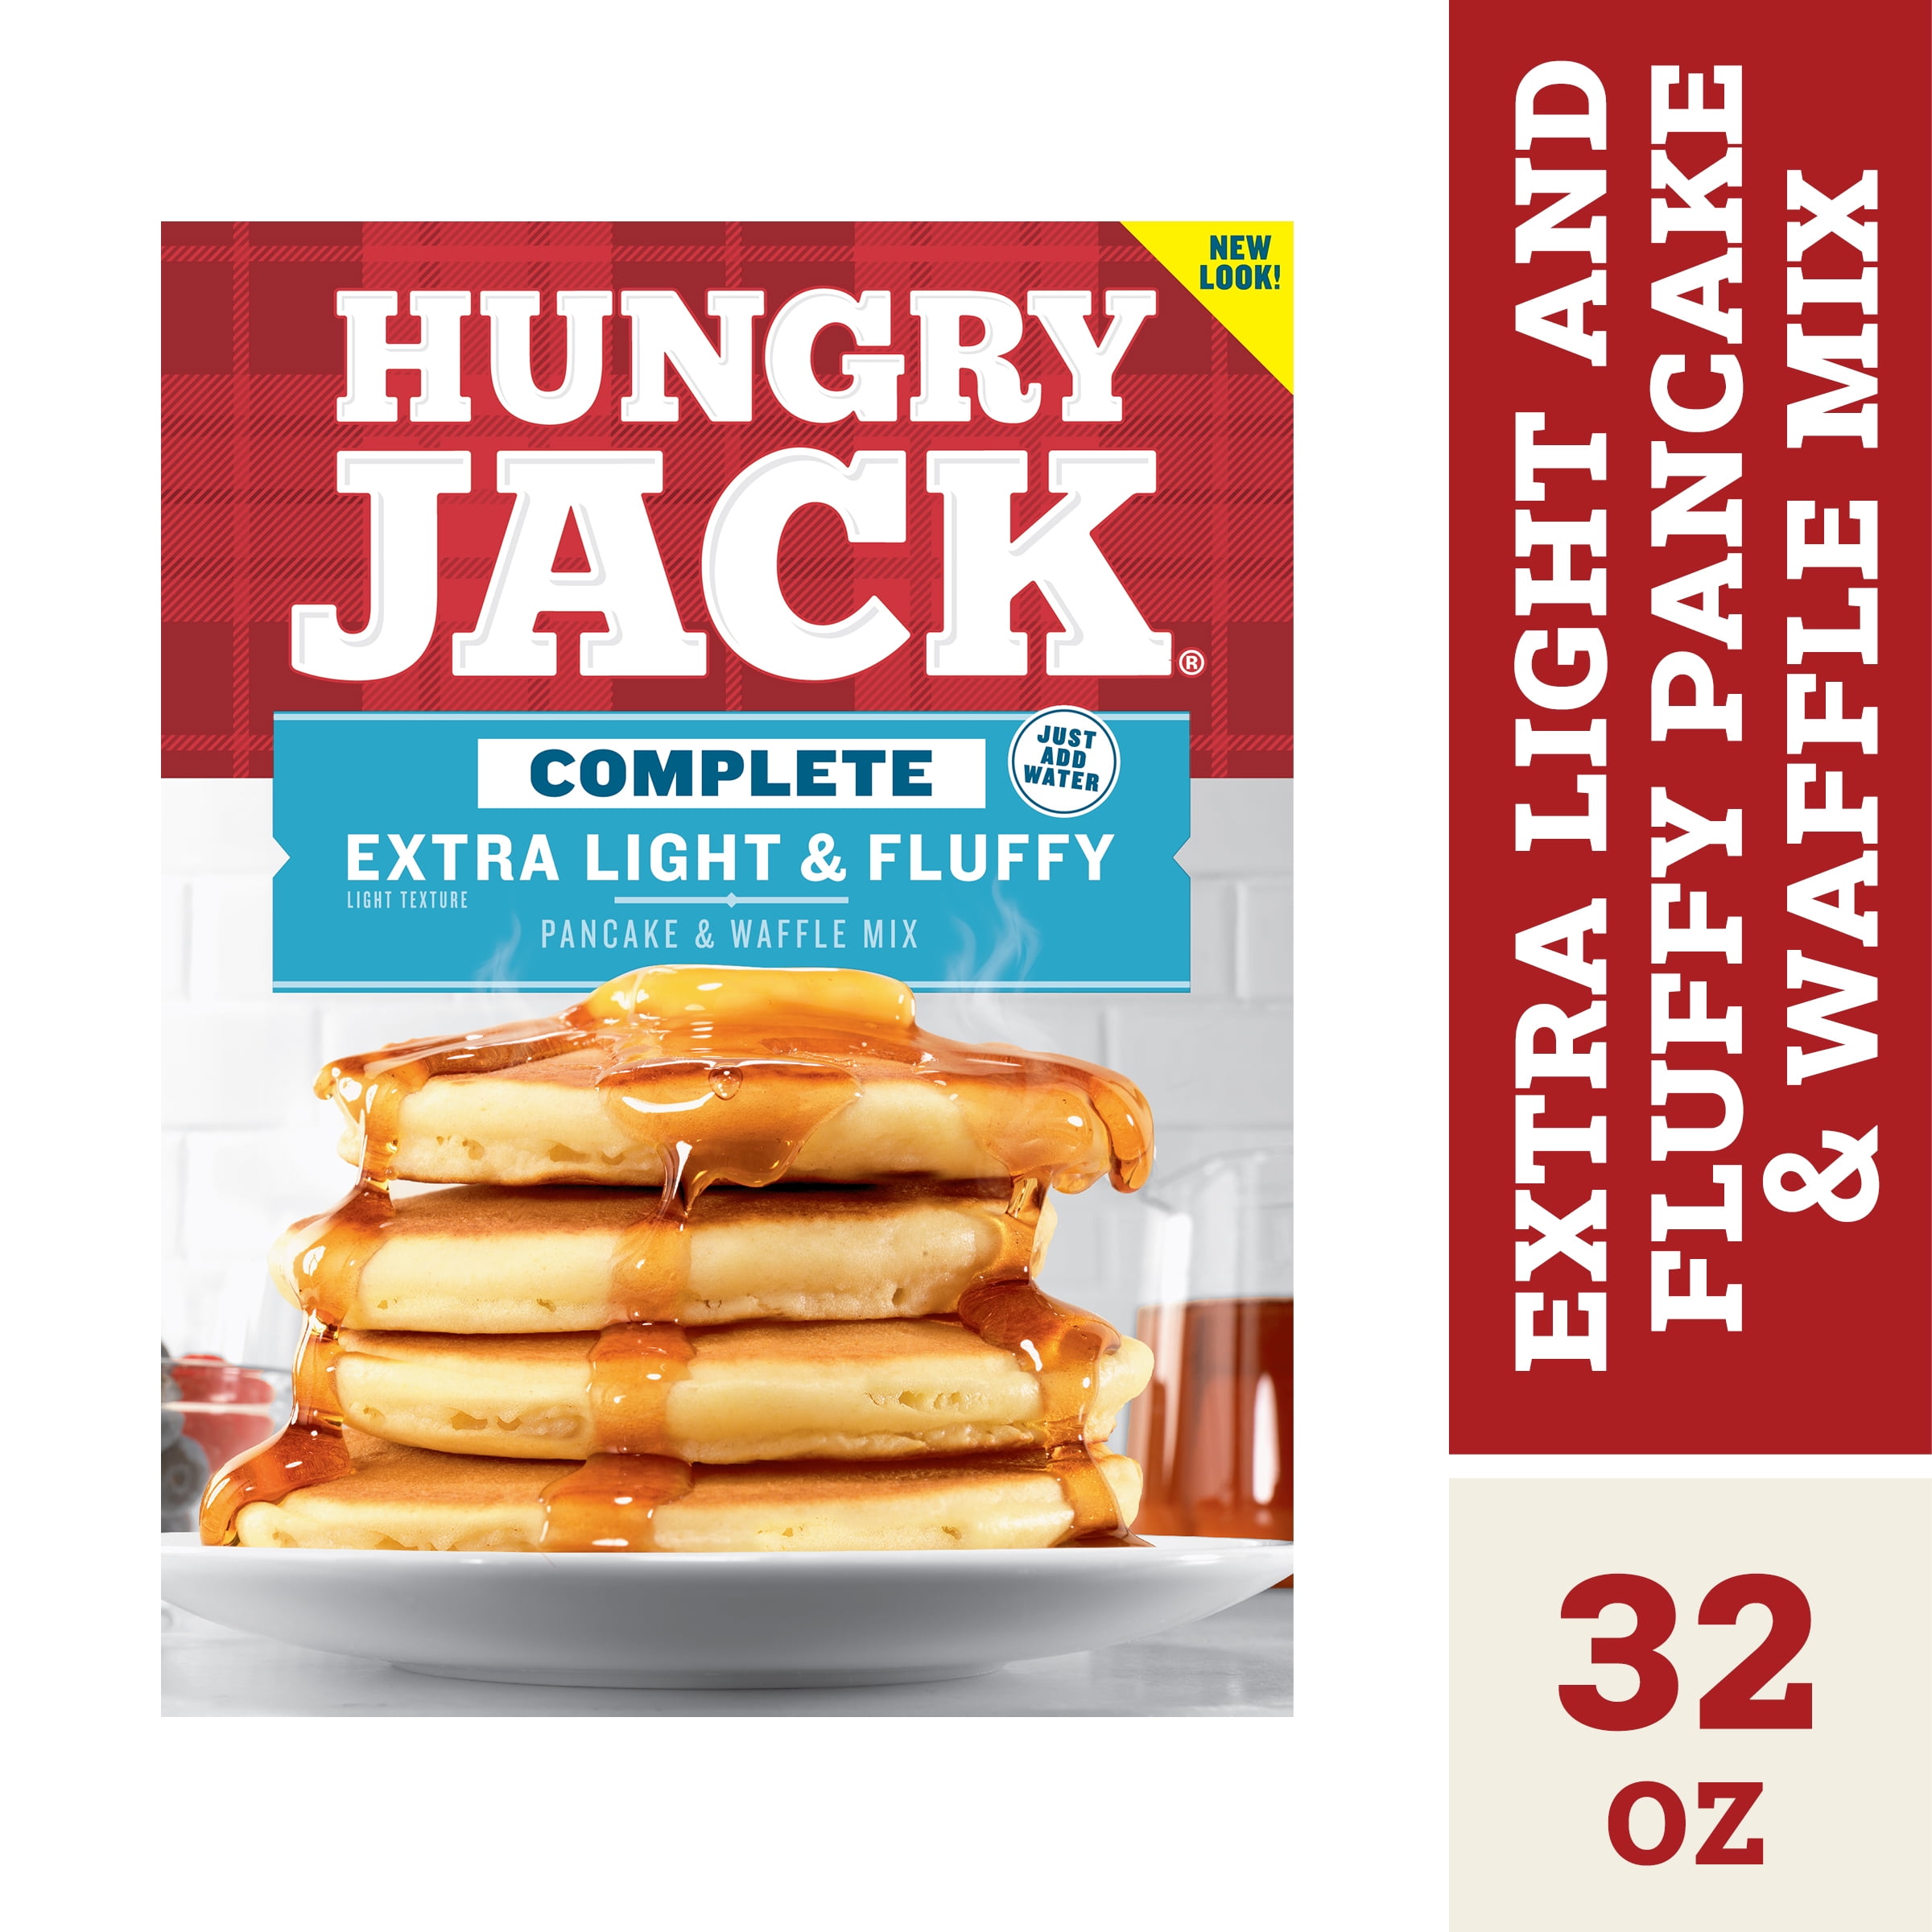 Hungry Jack Complete Extra Light and Fluffy Pancake Mix and Waffle Mix, 32 oz Box